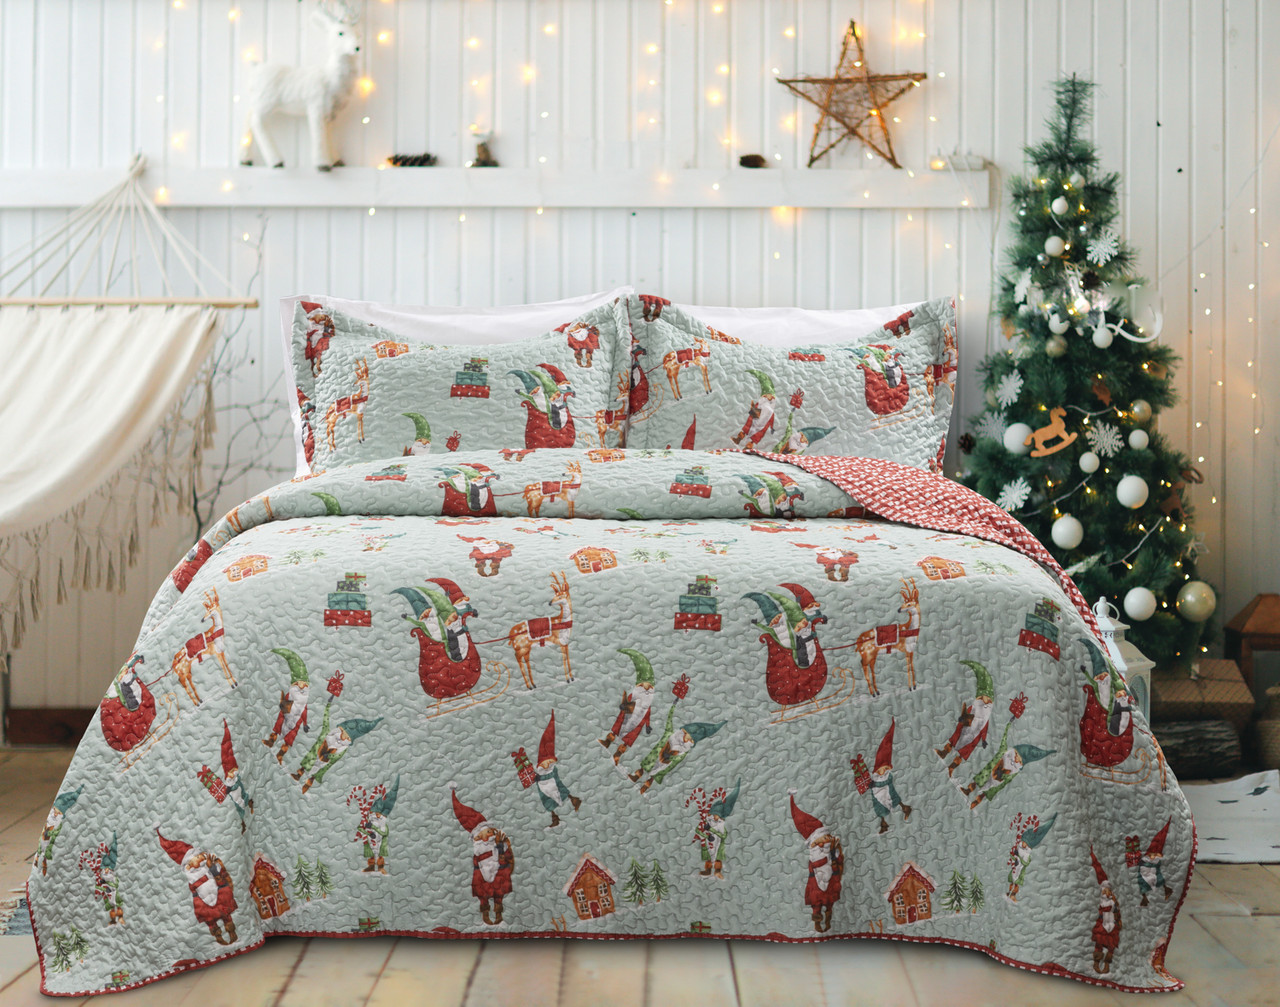 Our Santa's Elves Coverlet Set in a bright white bedroom, accessorized with seasonal wall decorations and a Christmas tree.